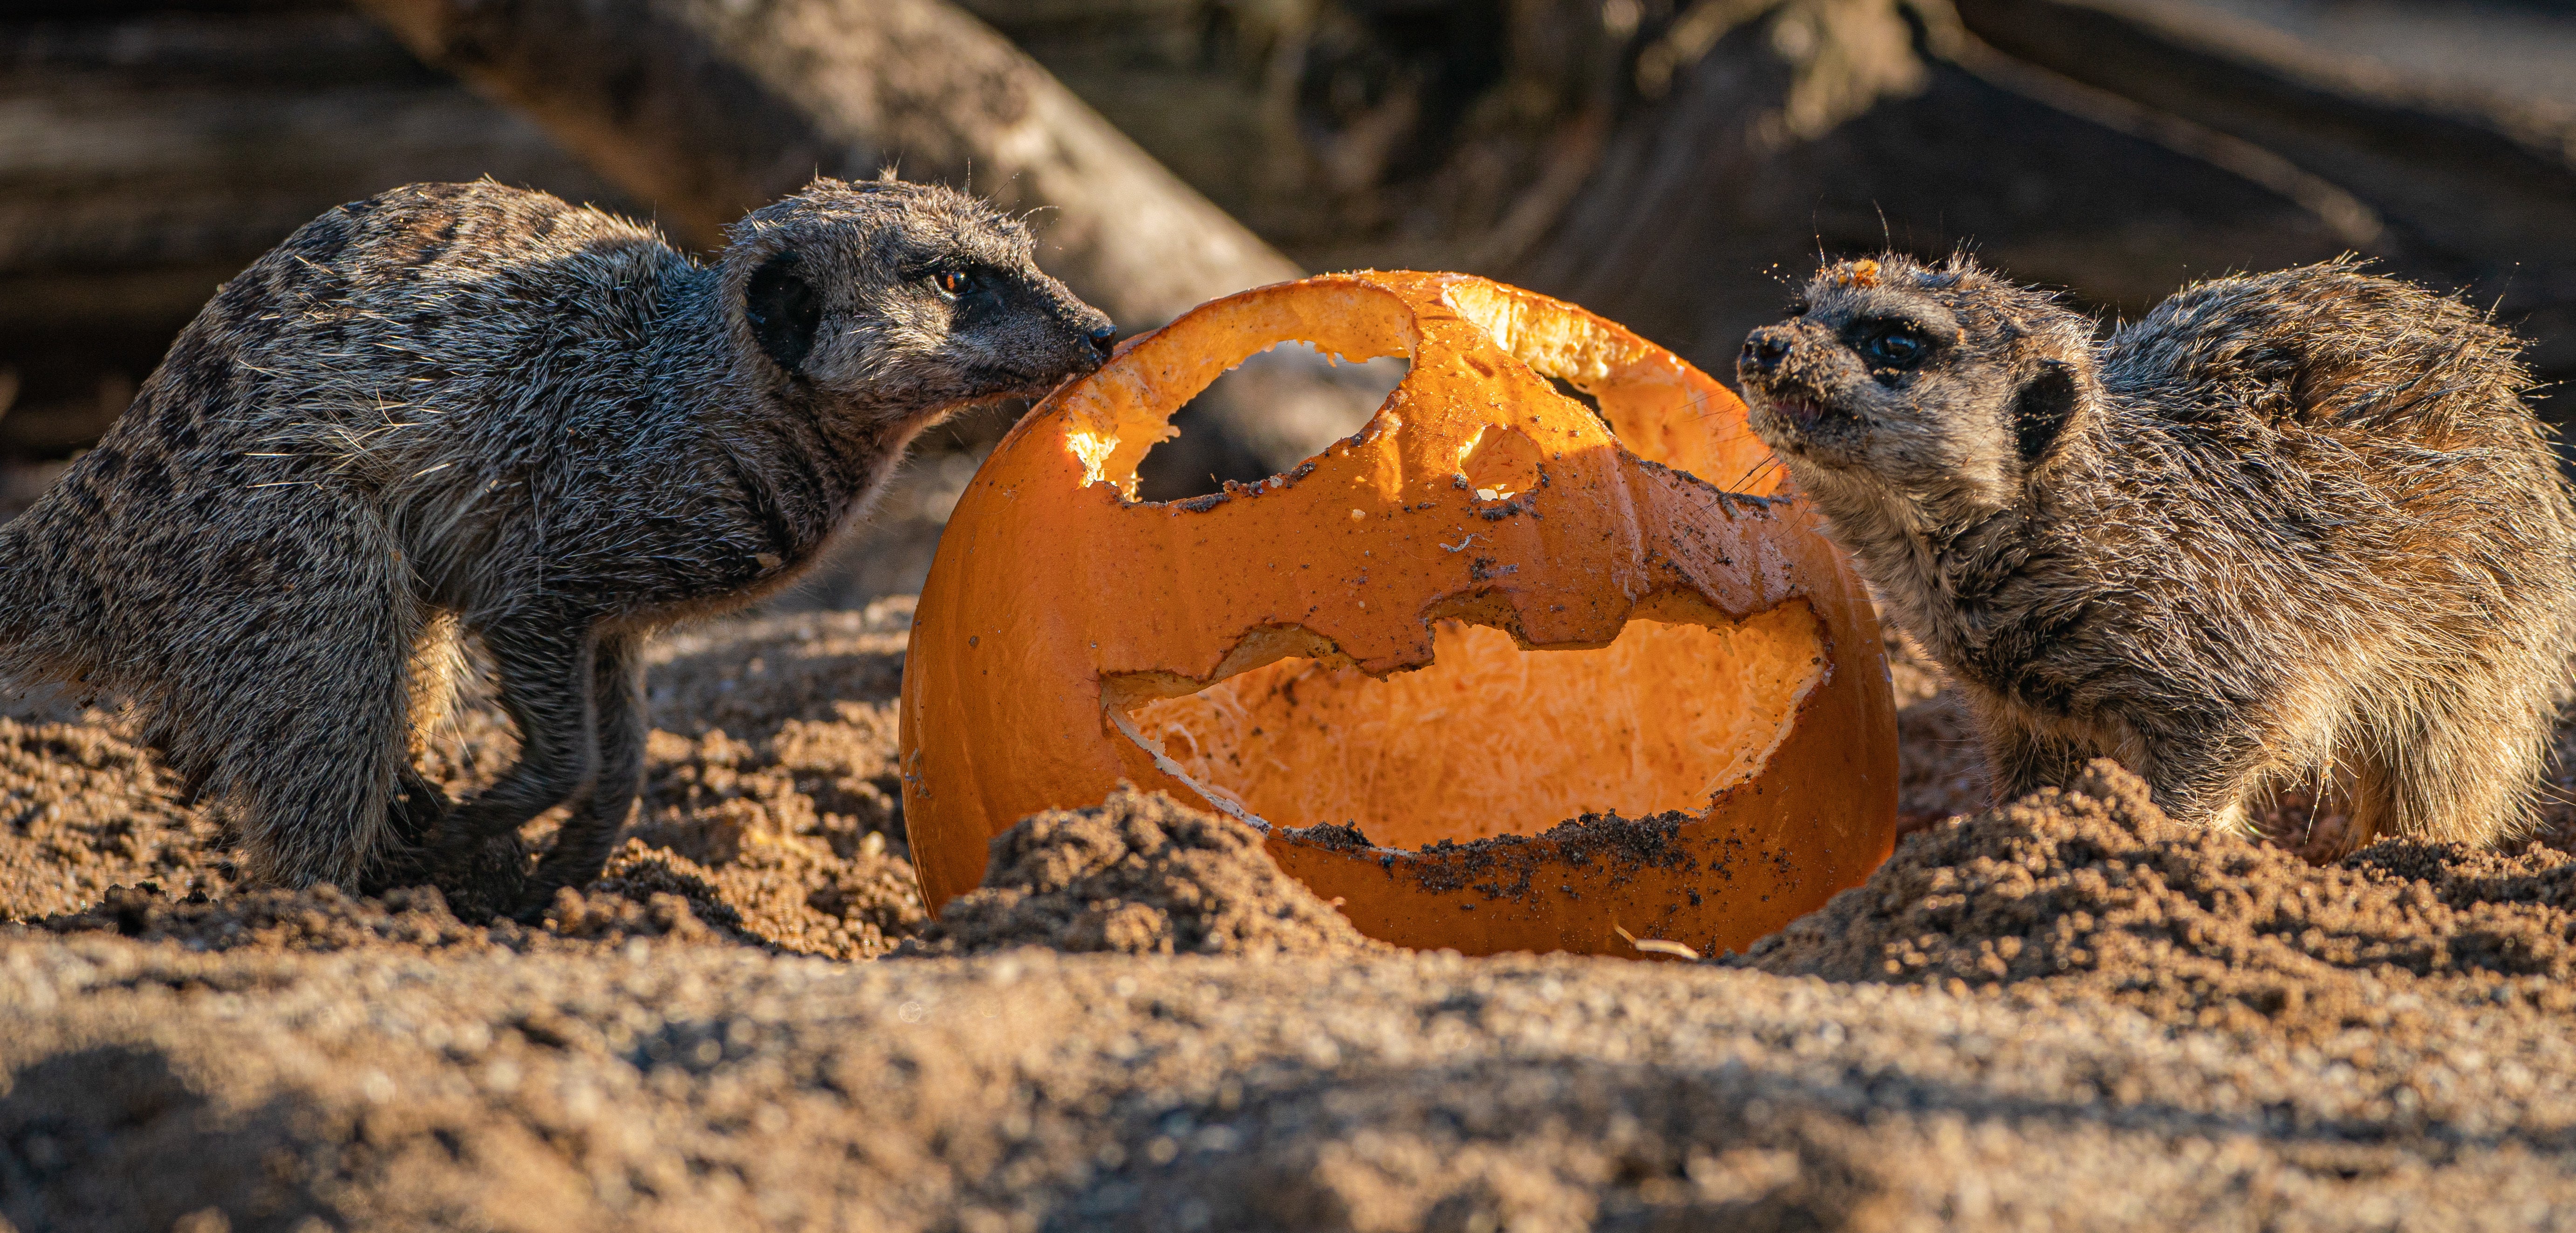 A meerkat explores a pumpkin in the enclosure at Wild Place, Bristol, where some of the animals are having pumpkin treats as part of their environmental enrichment